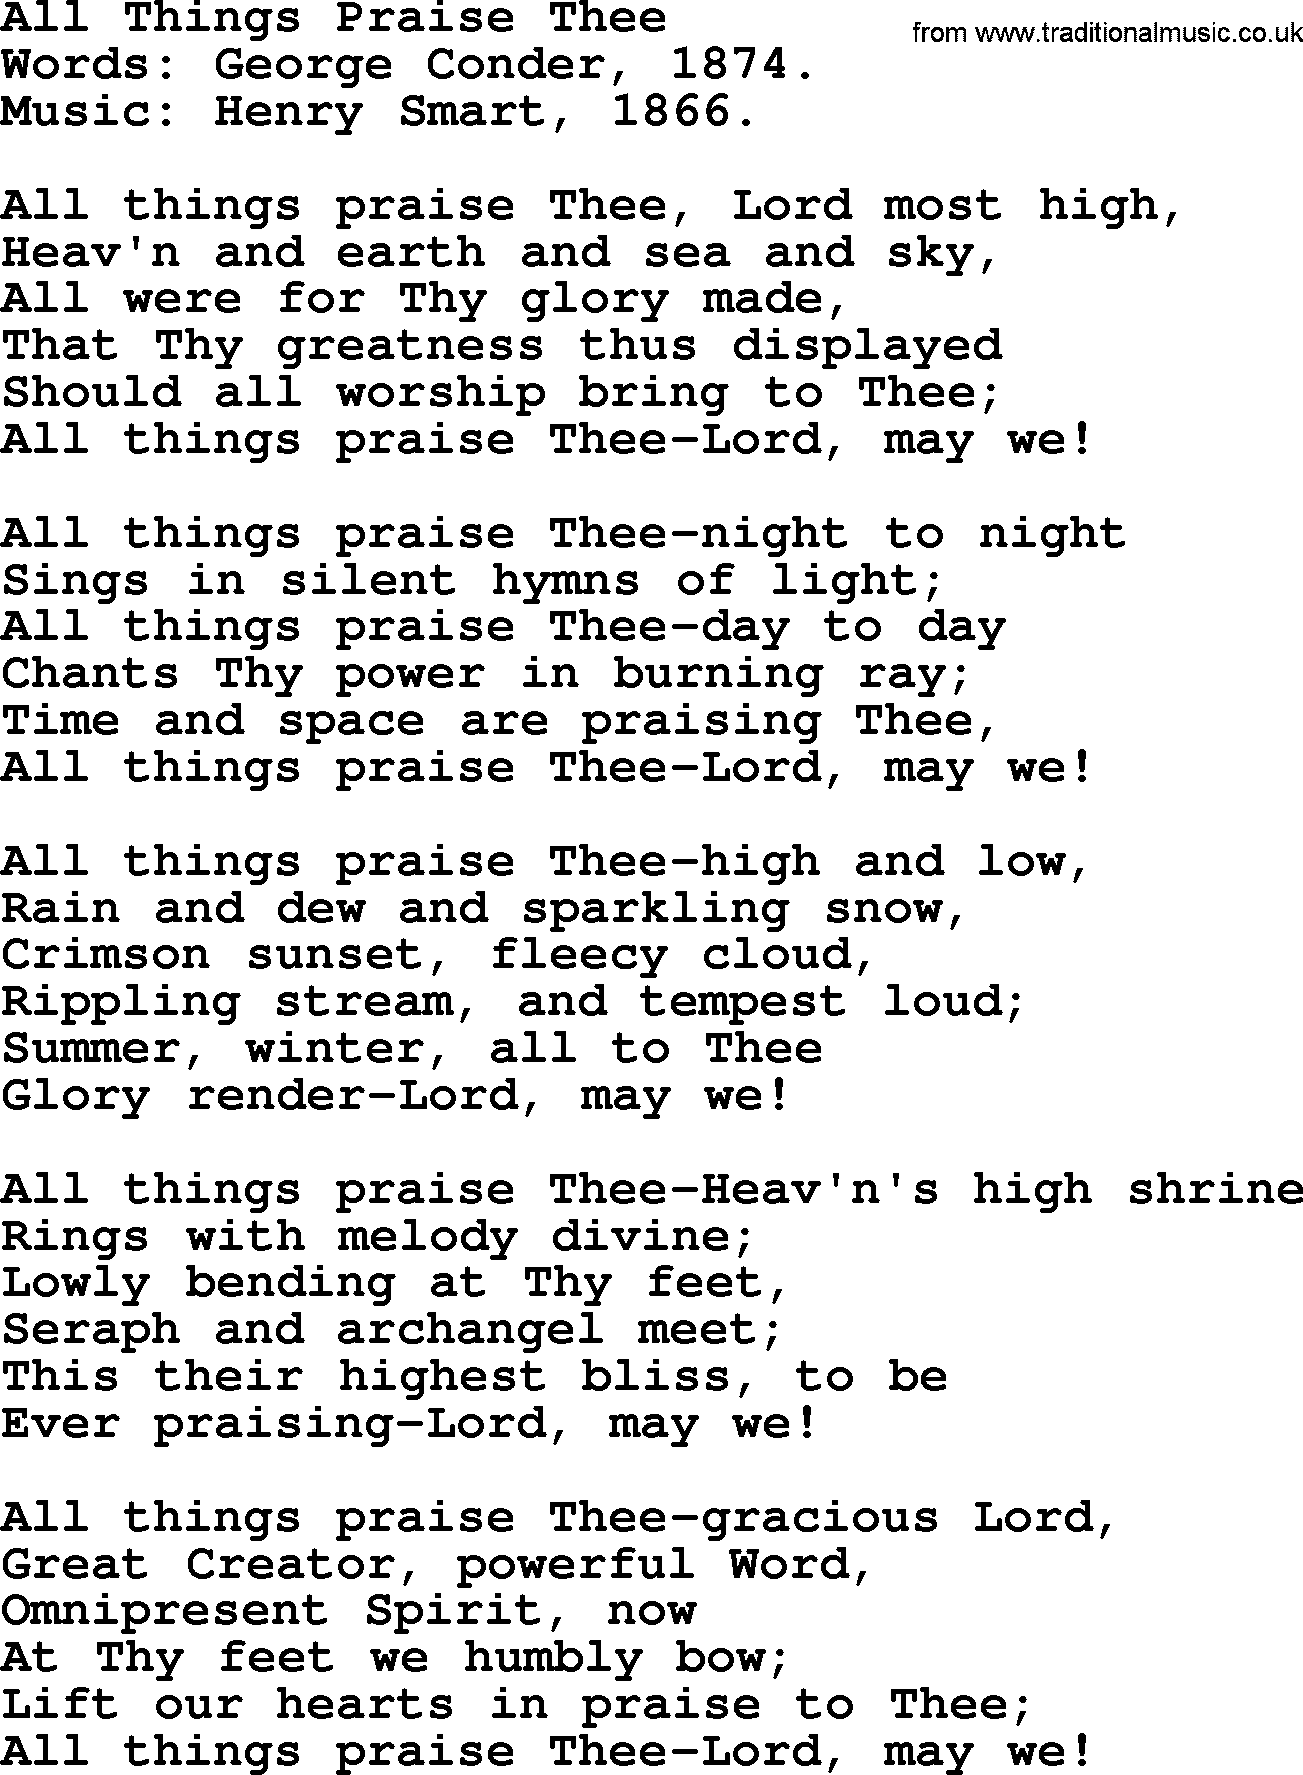 Hymns about Angels, Hymn: All Things Praise Thee.txt lyrics with PDF